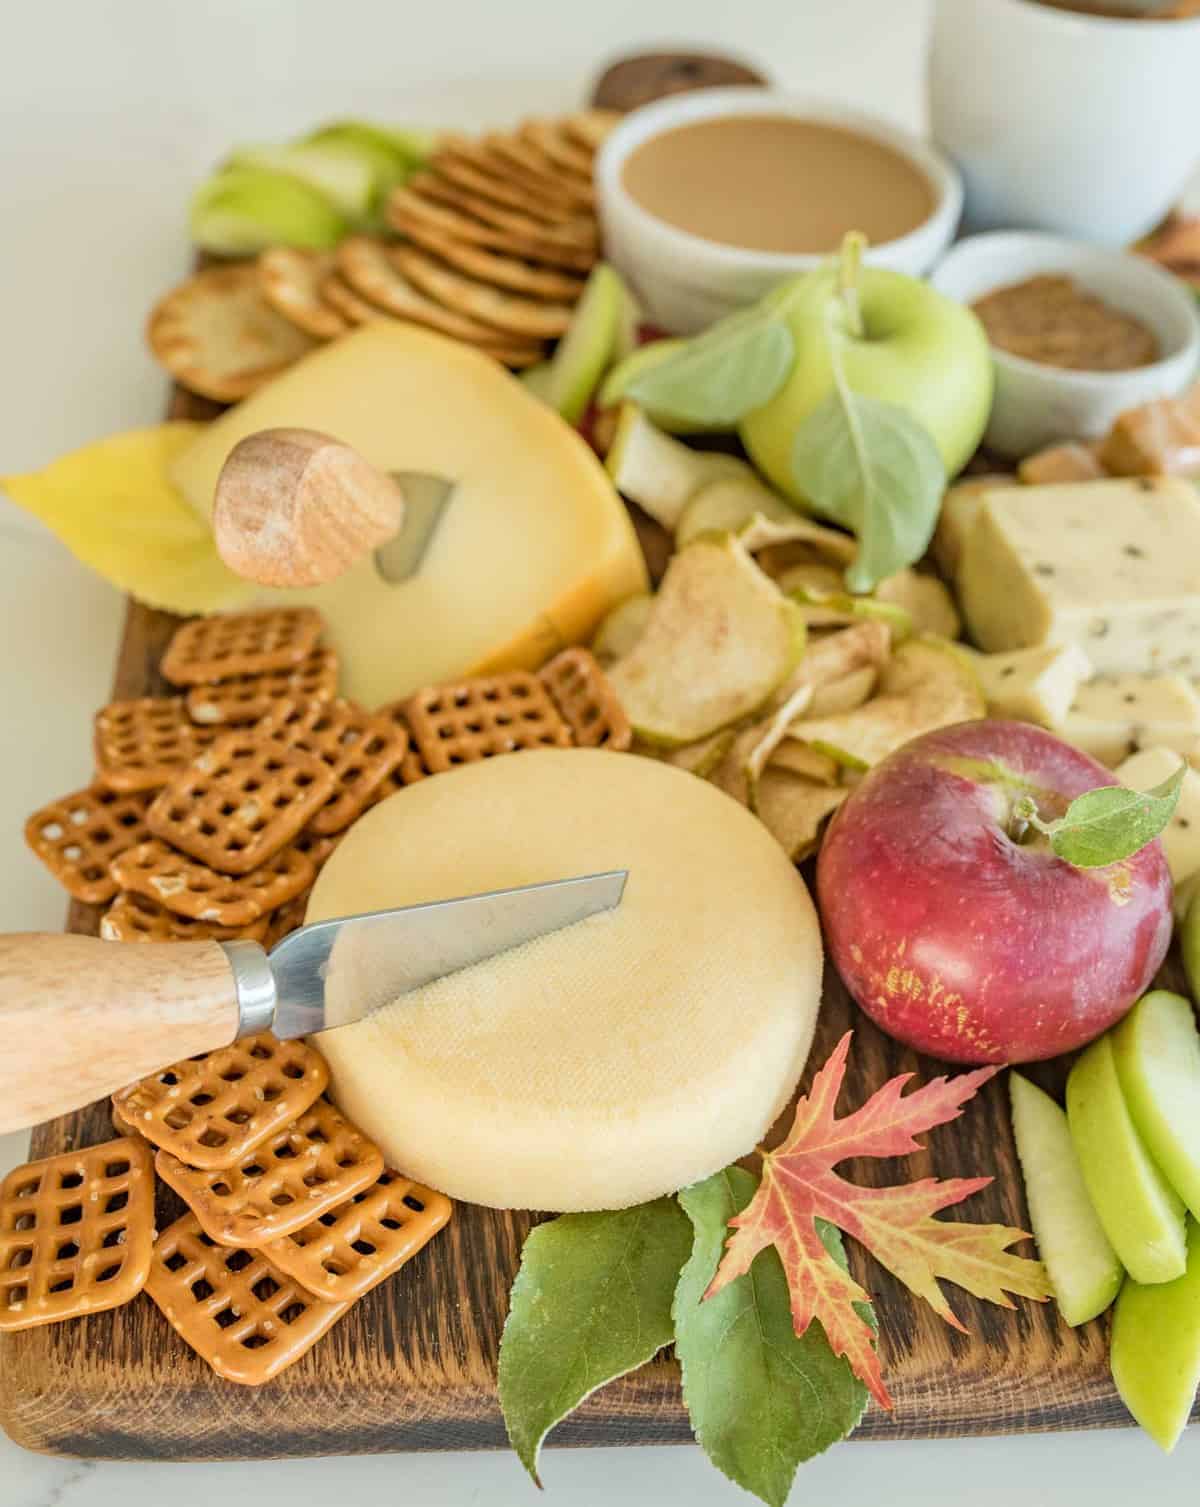 How to make a simple fall apple and cheese board that is perfect for snacking, an appetizer, parties, or just a slow evening in.